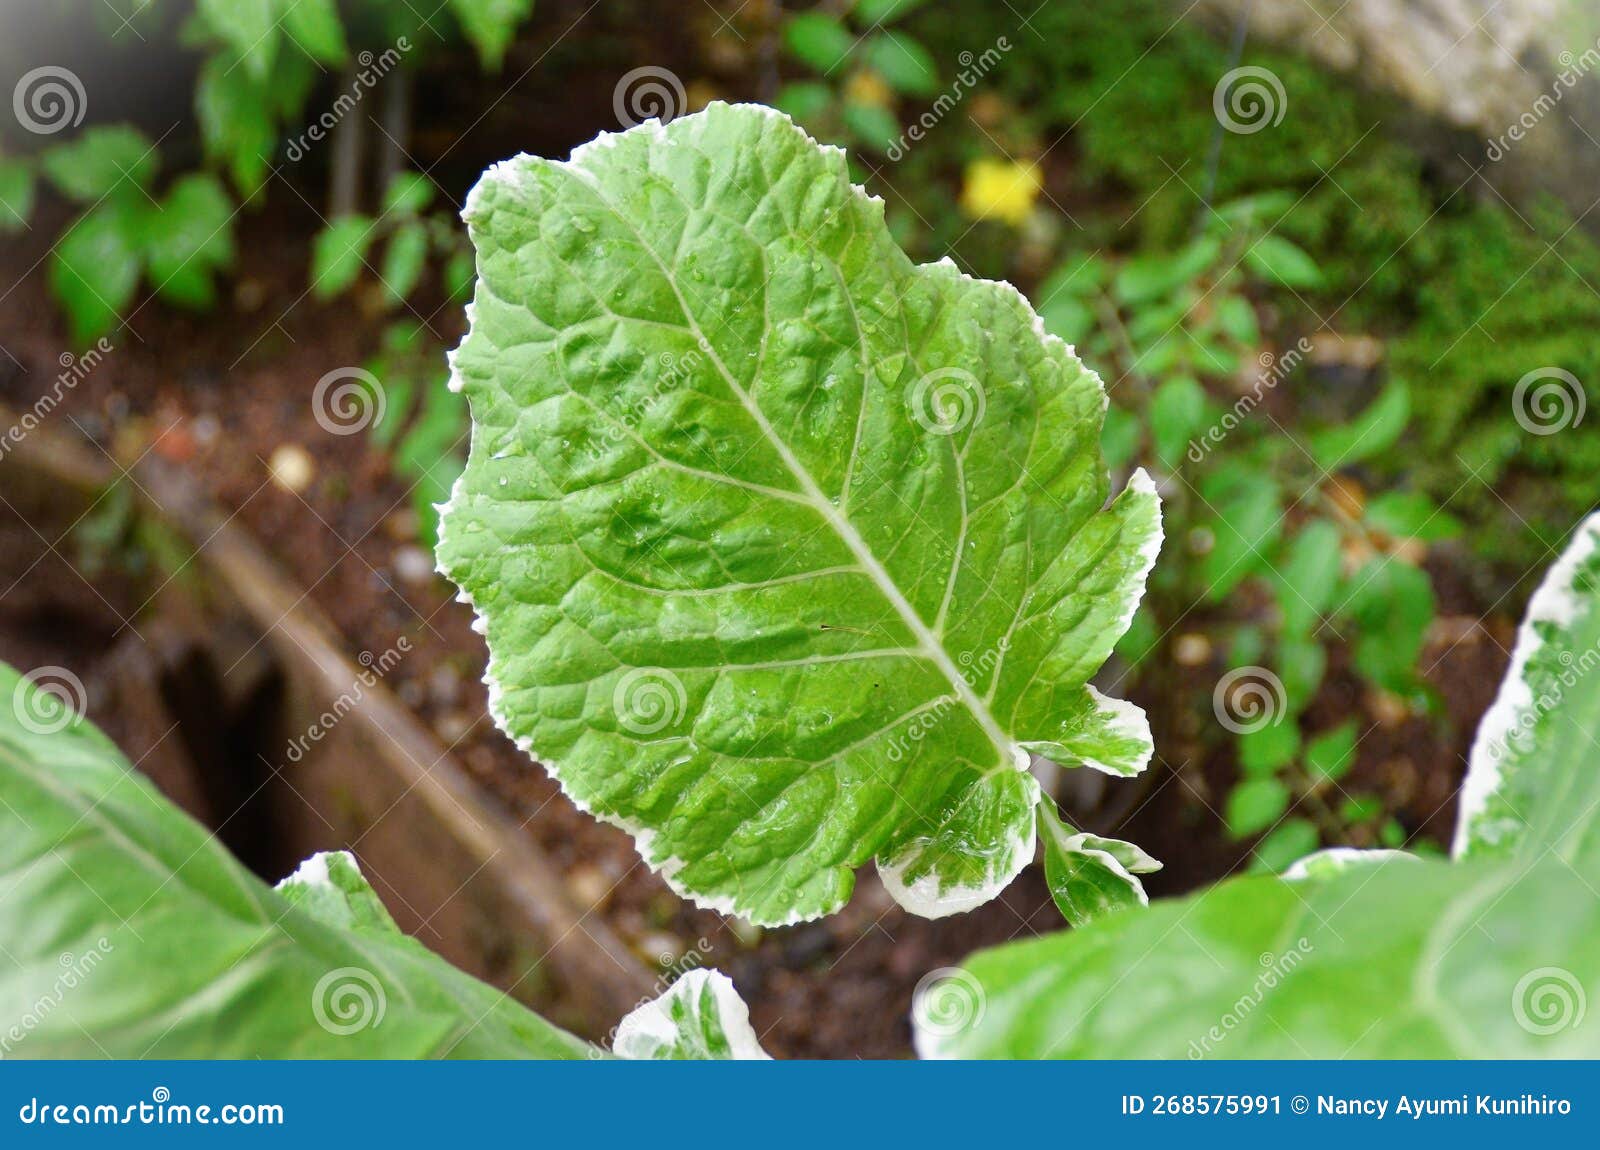 the beautiful variegated cabbage leaf growing